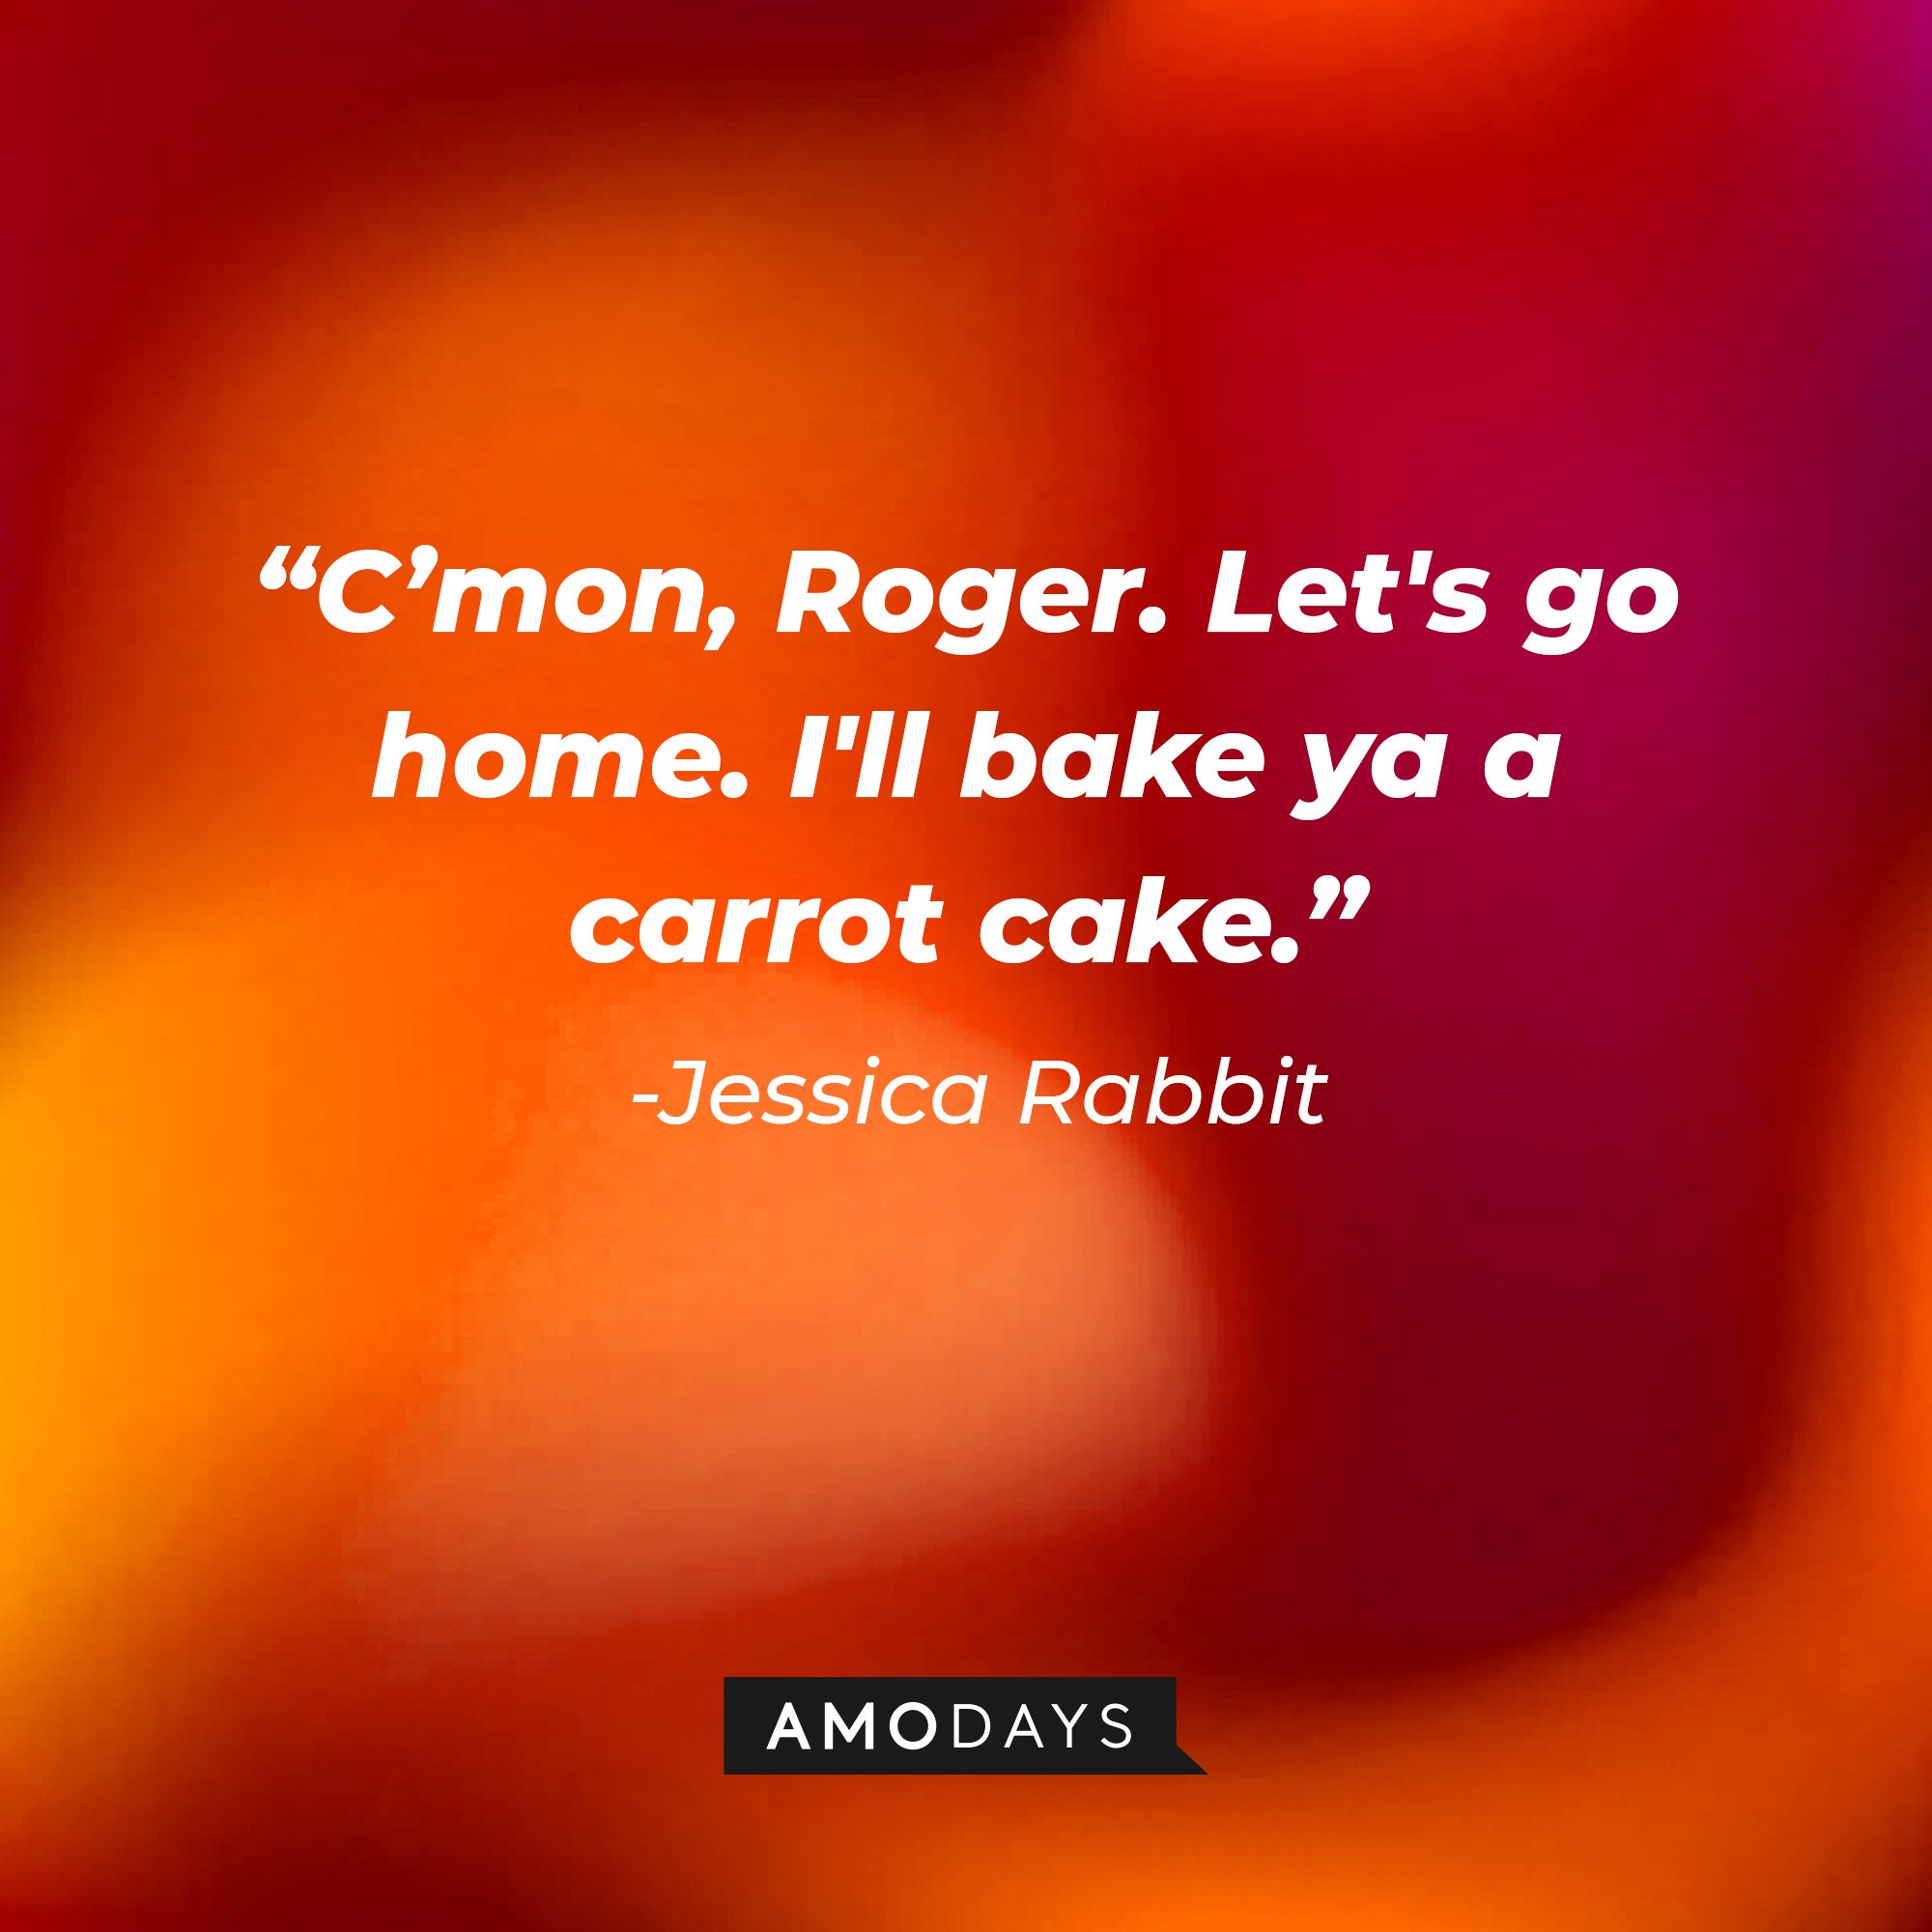 Jessica Rabbit’s quote: “C'mon, Roger. Let's go home. I'll bake ya a carrot cake." | Image: AmoDays